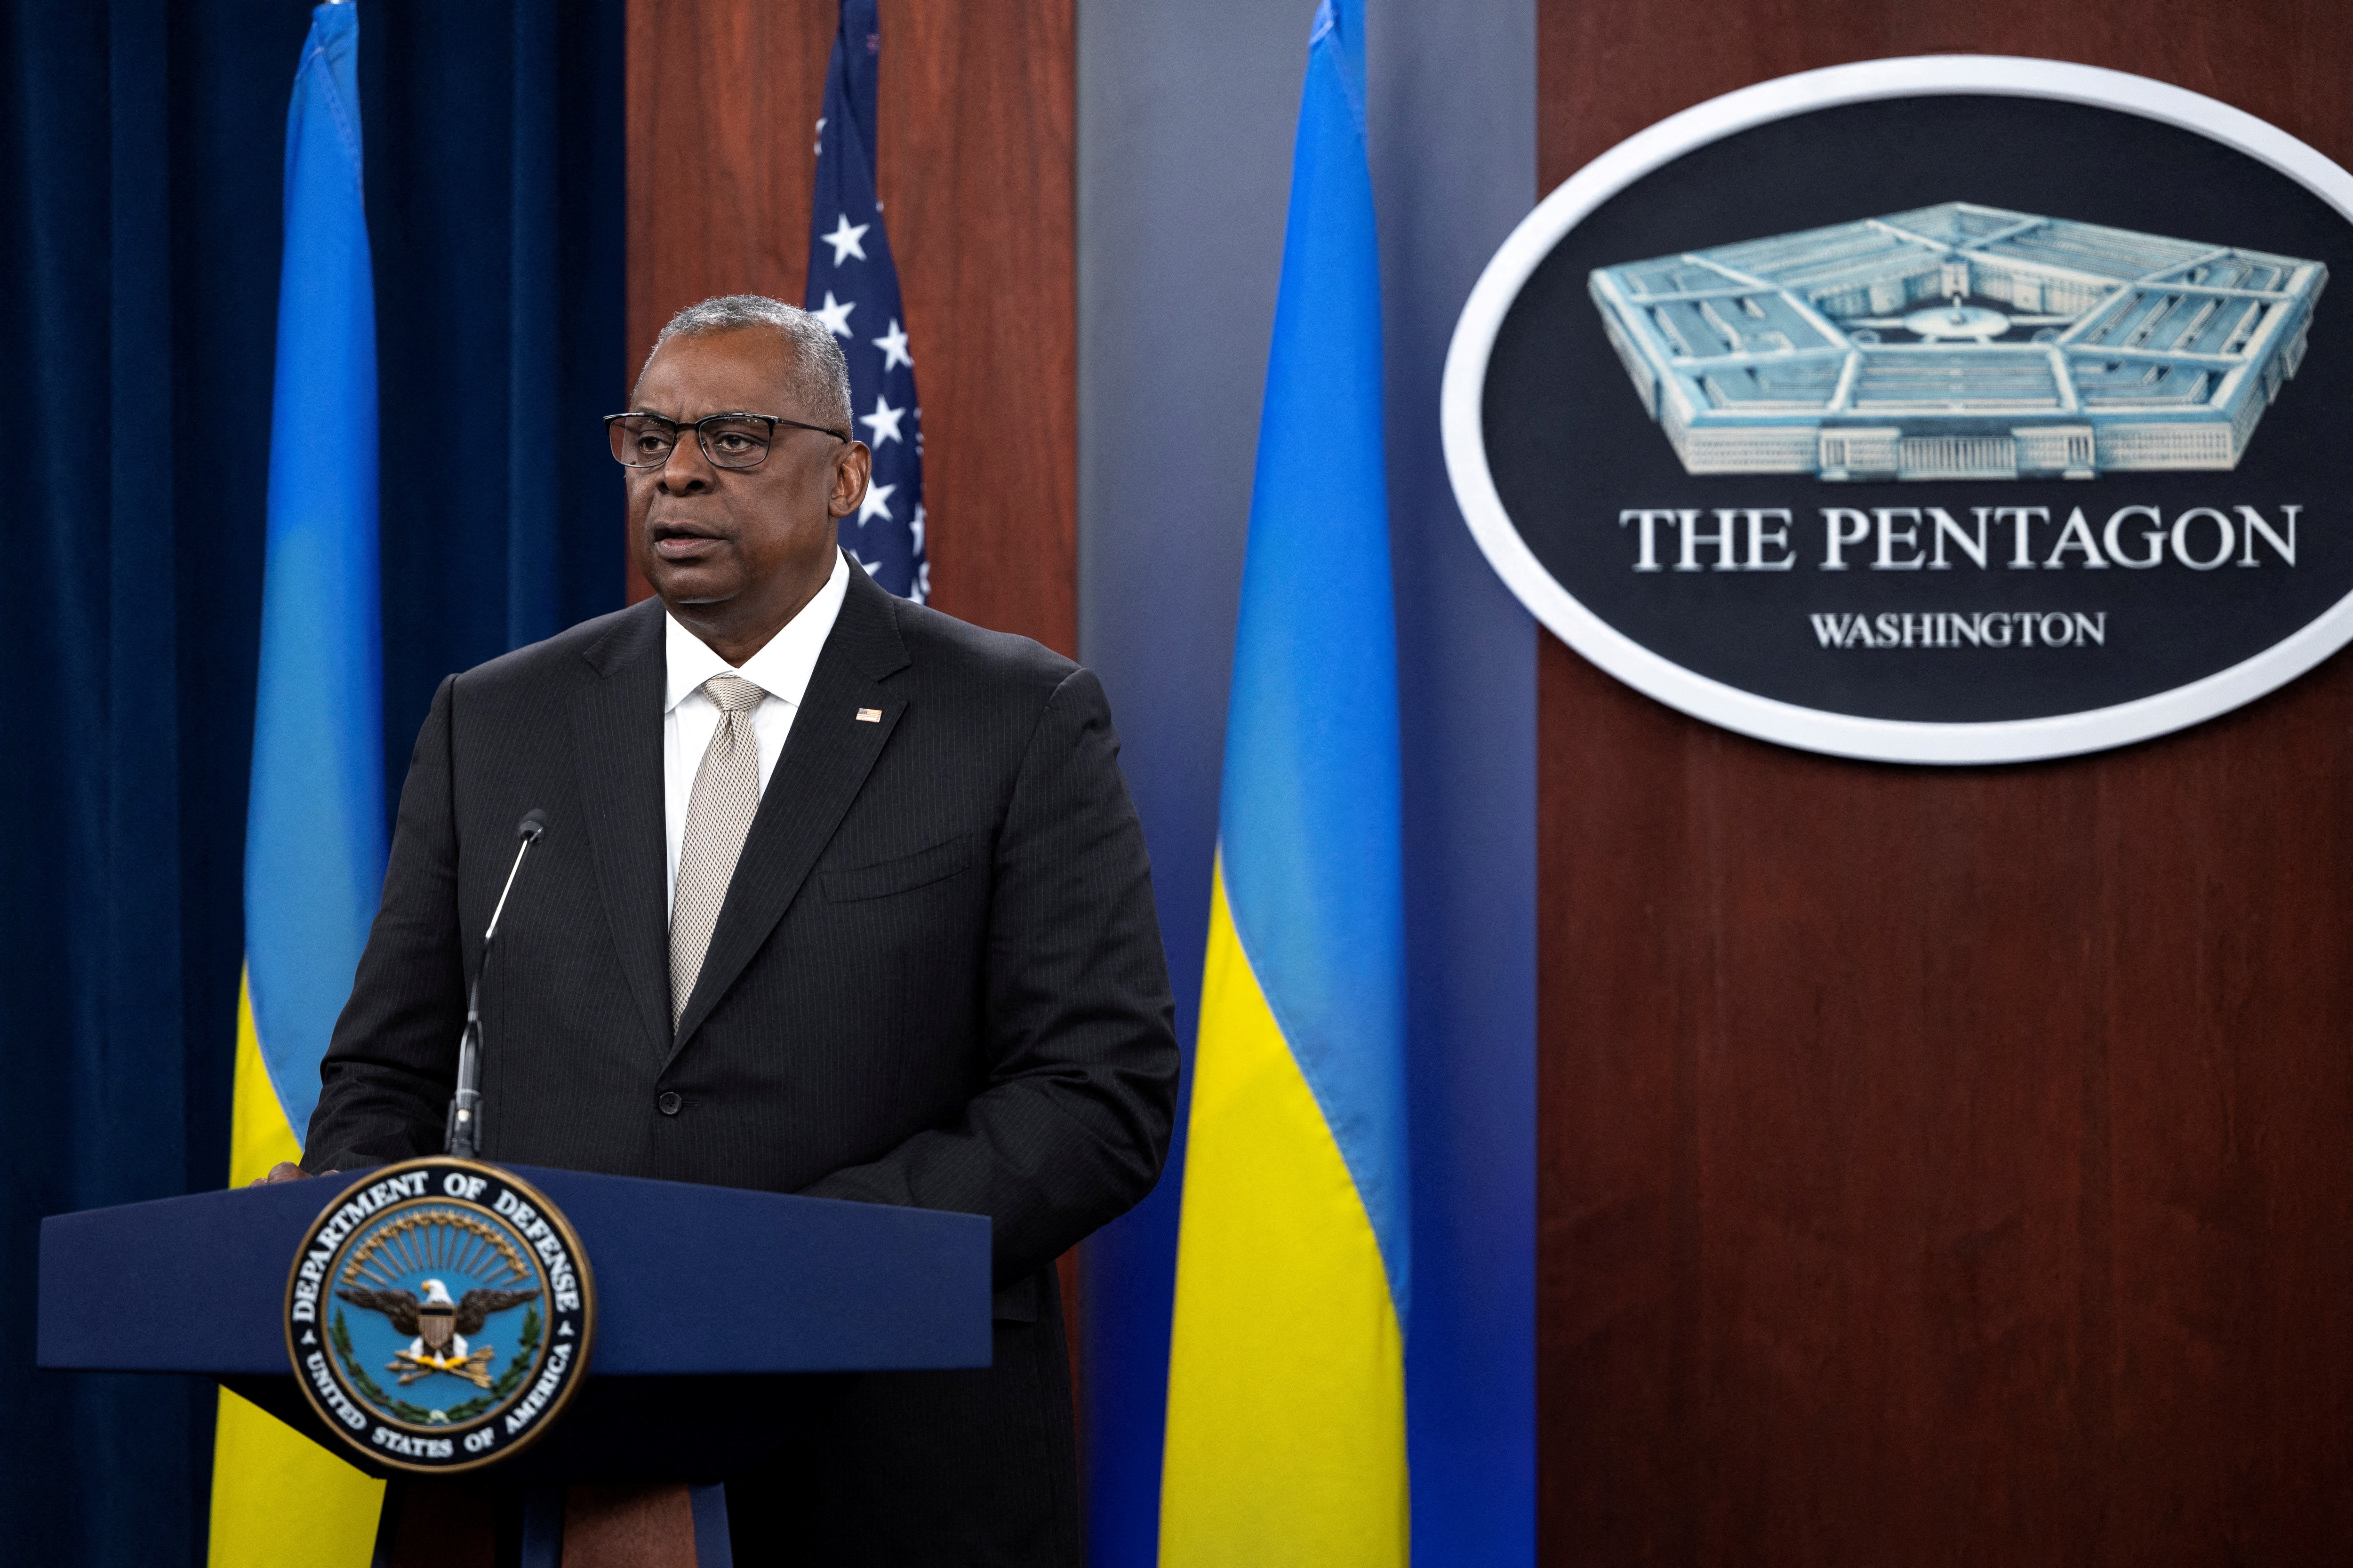 FILE PHOTO: U.S. Defense Secretary Lloyd Austin speaks during a news briefing after participating a virtual Ukraine Defense Contact Group meeting at the Pentagon in Arlington, Virginia, U.S., November 16, 2022. REUTERS/Tom Brenner/File Photo